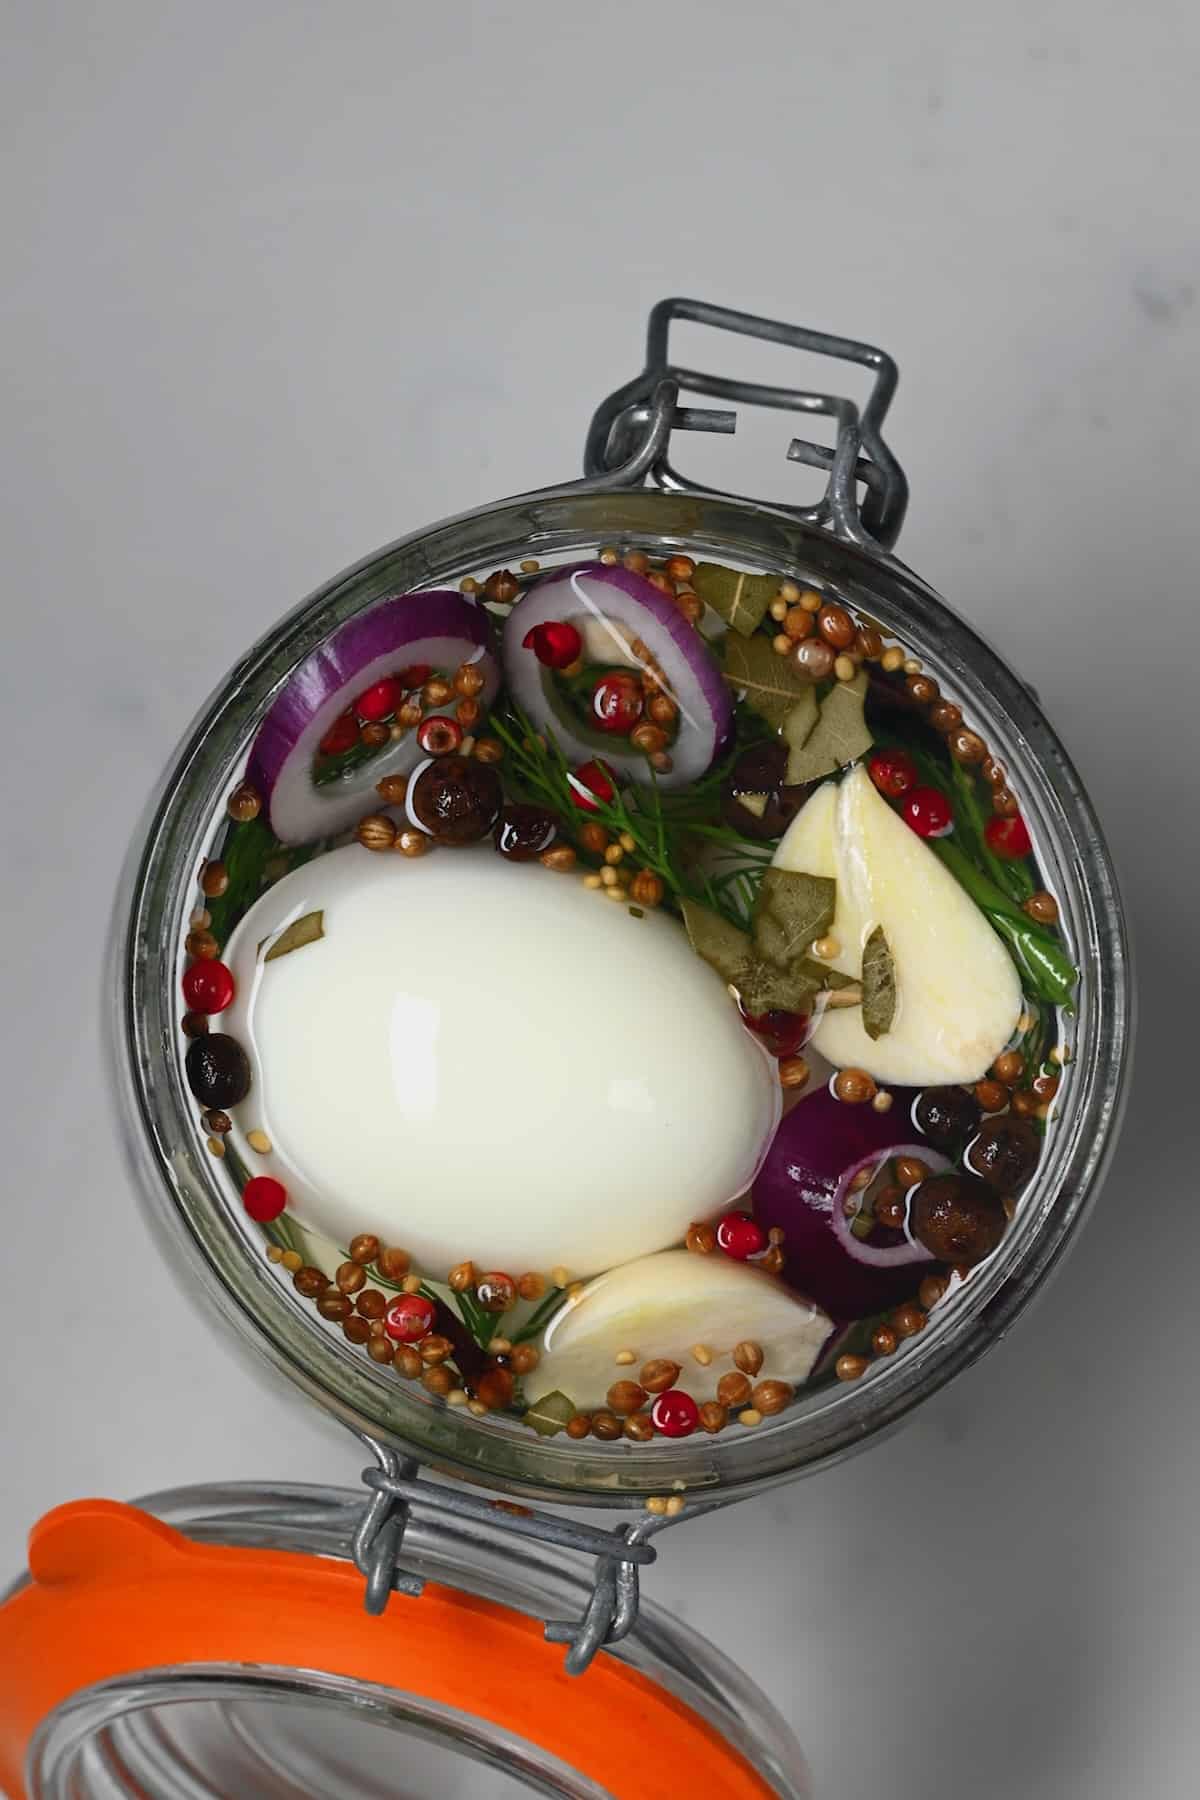 A jar with pickled eggs